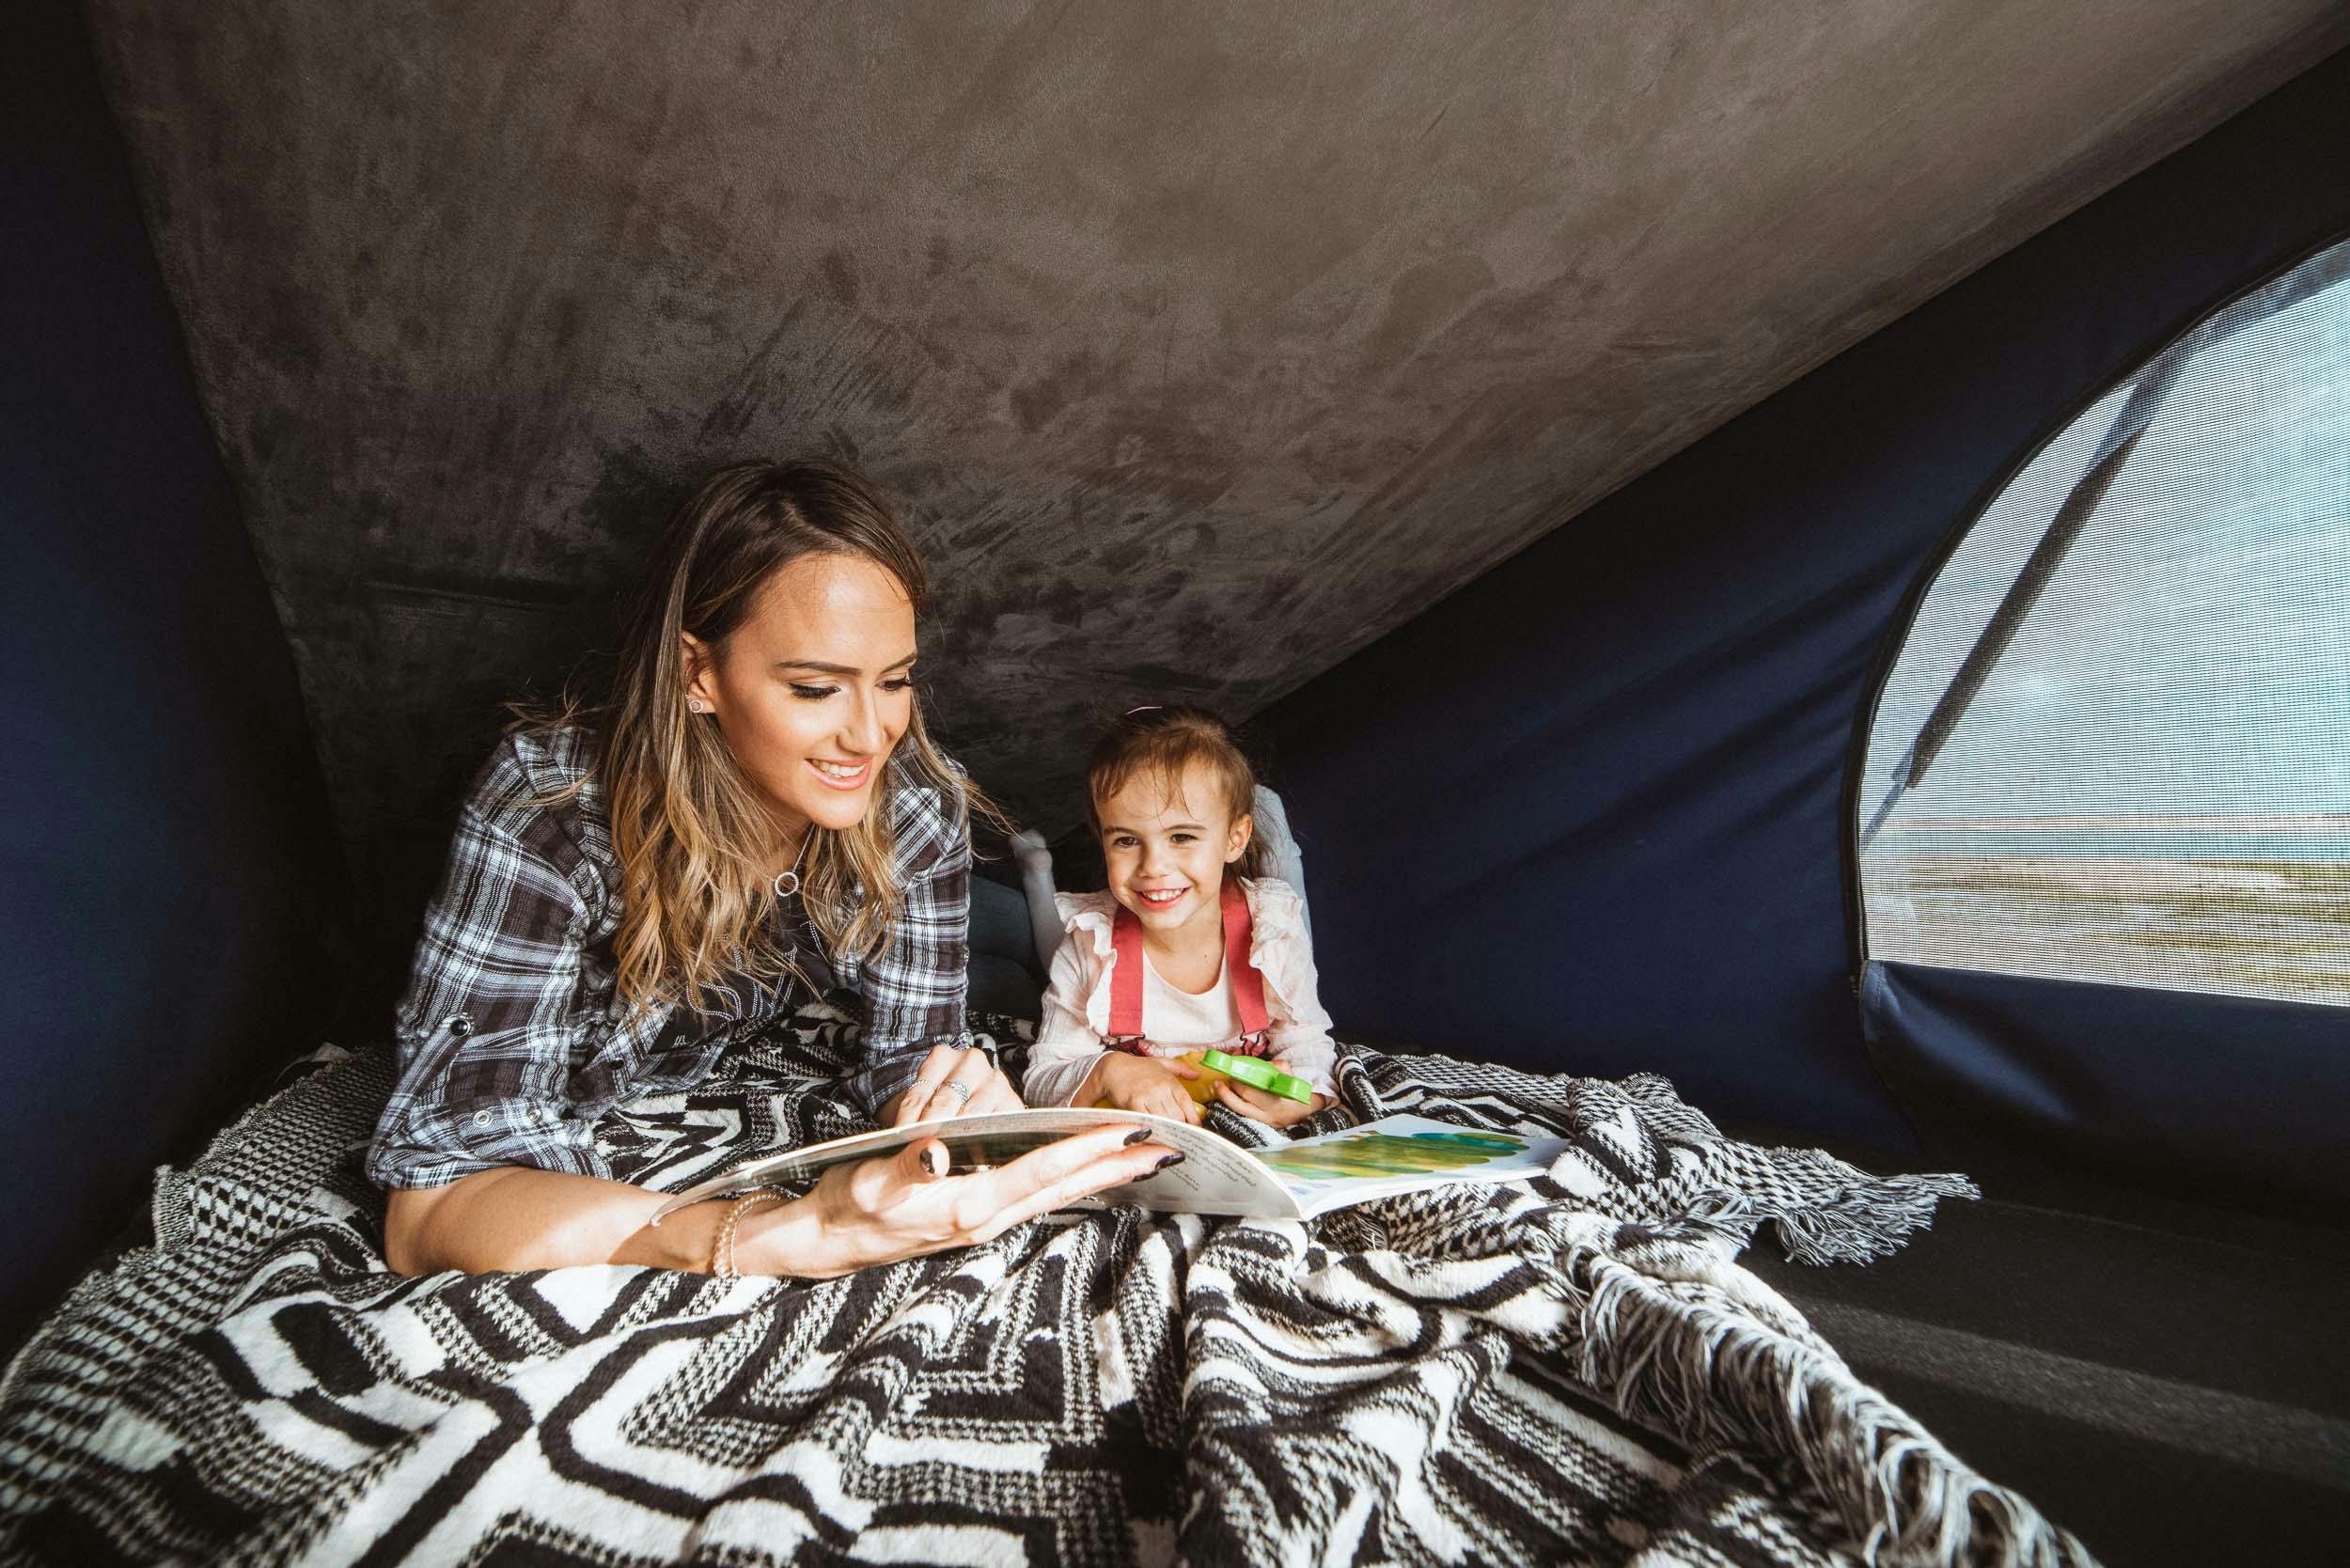 Mother and daughter relaxing in the camper pop up roof sleeping area.